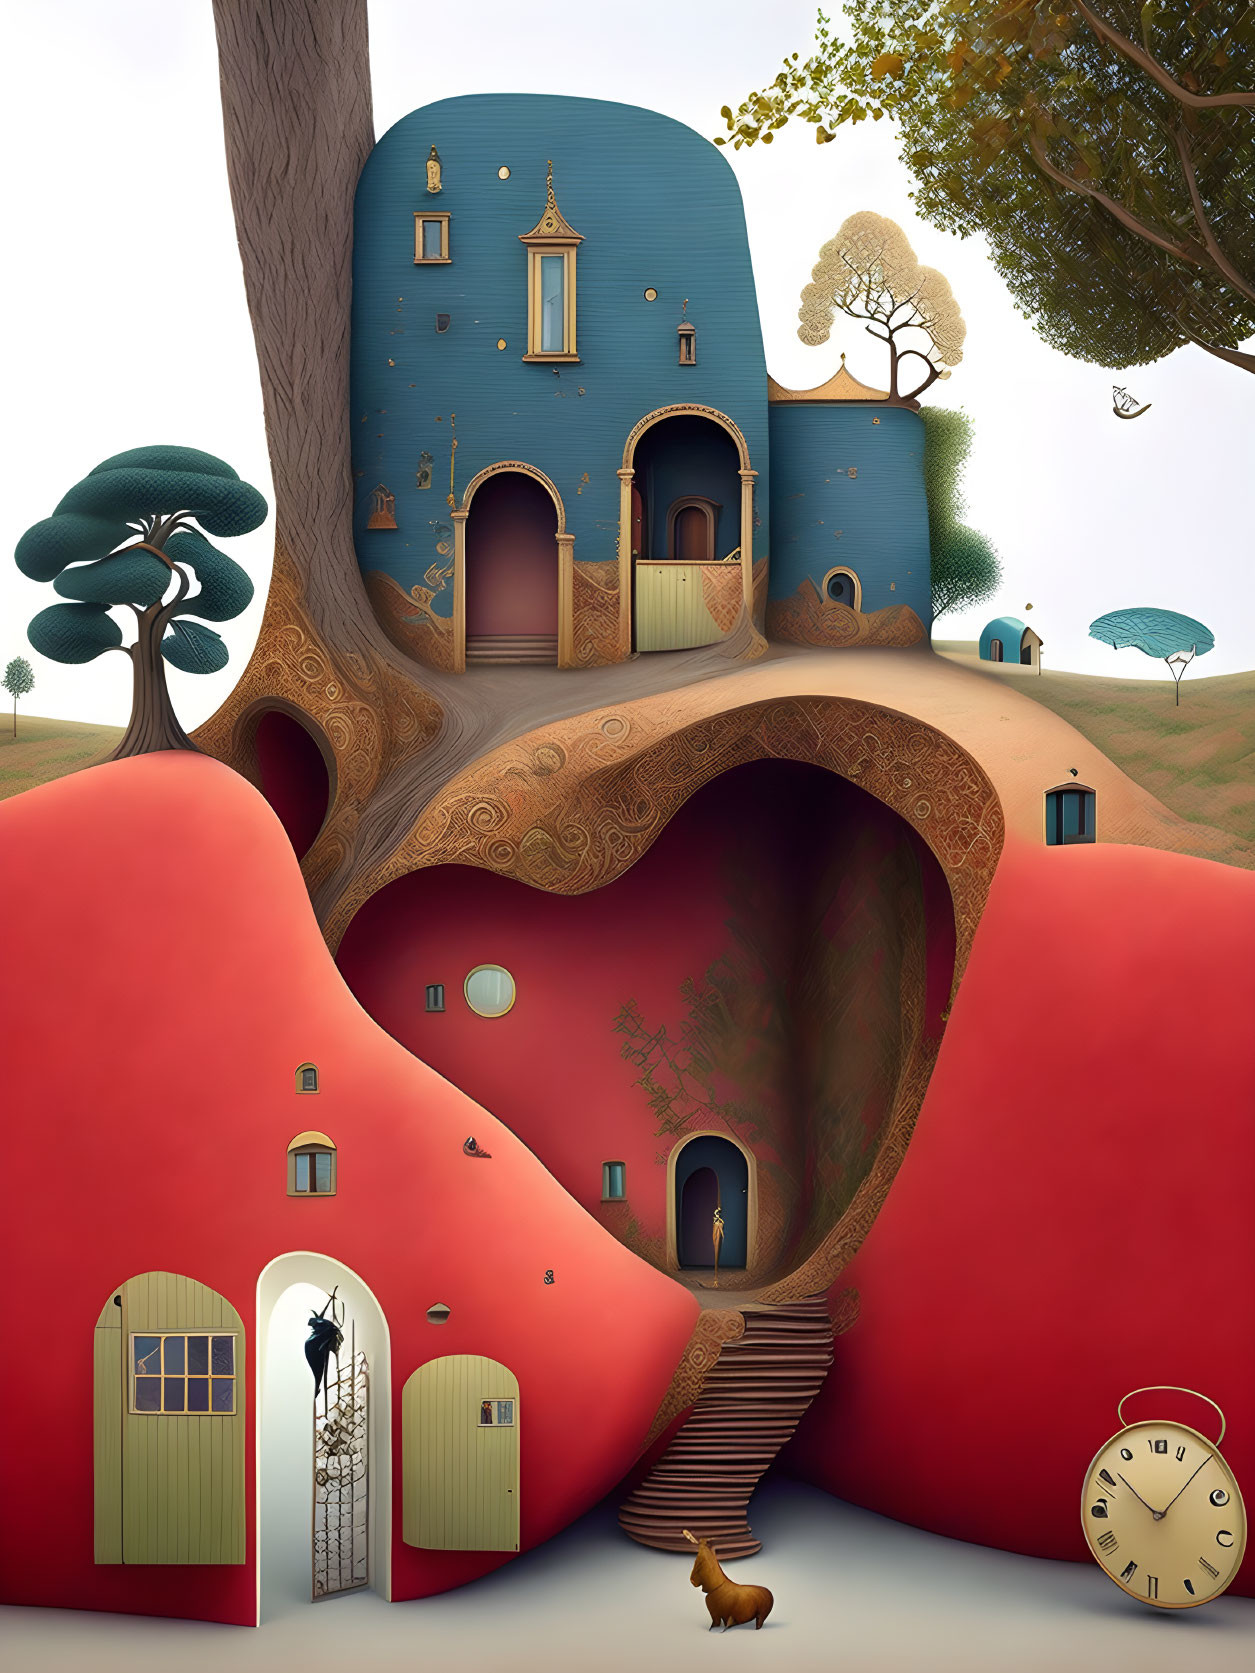 Whimsical surreal illustration of red tree with house, staircase, and clock